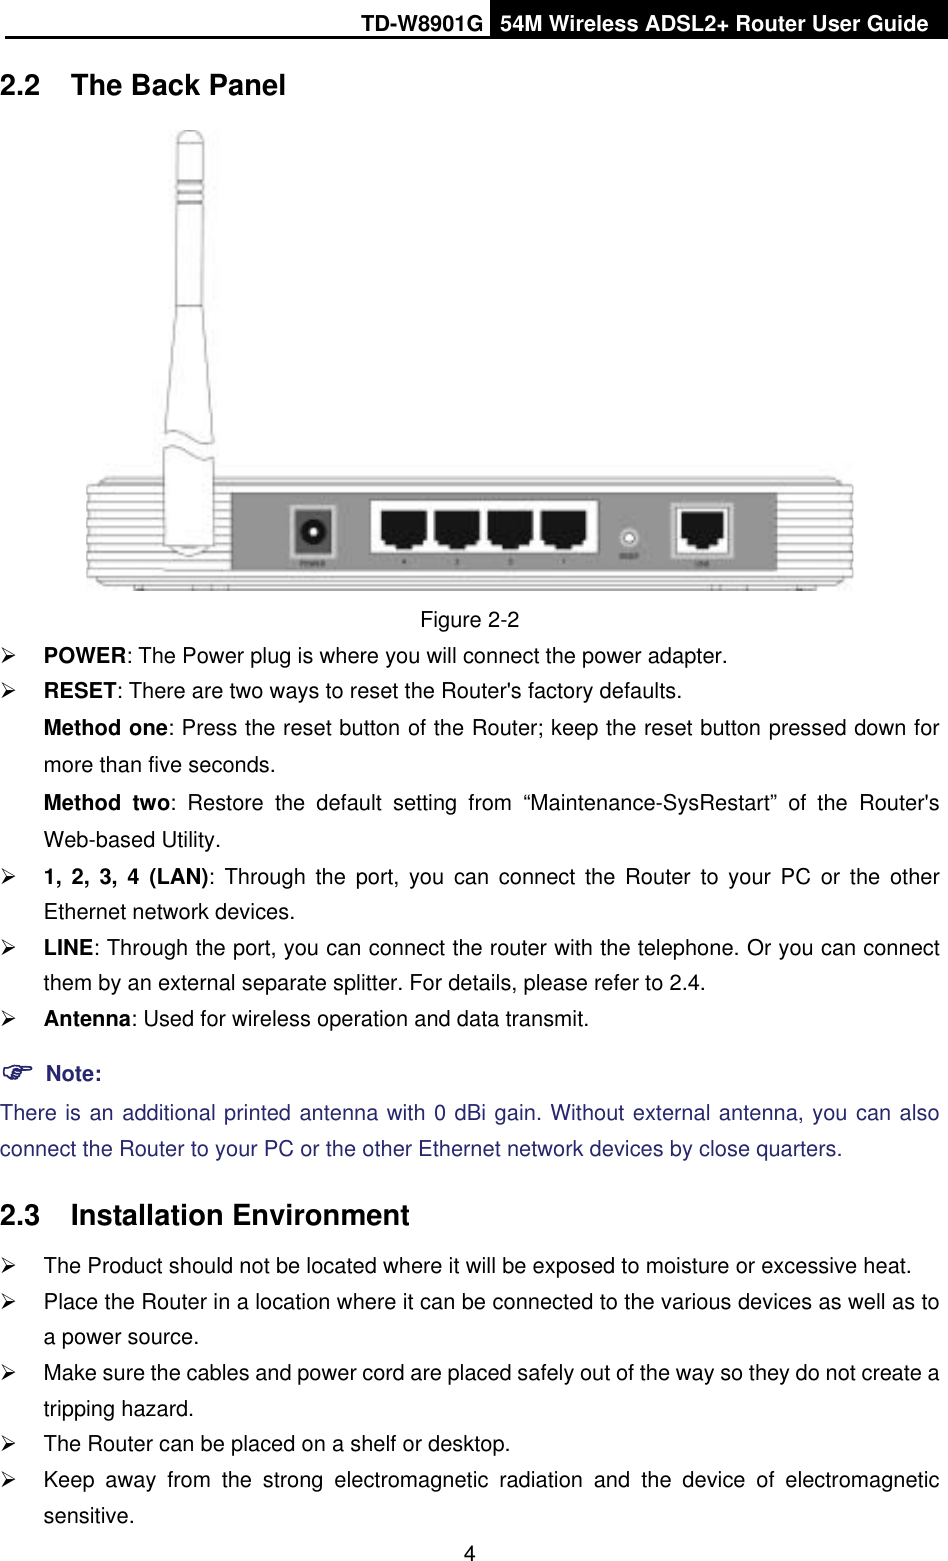 TD-W8901G 54M Wireless ADSL2+ Router User Guide42.2 The Back Panel Figure 2-2¾POWER: The Power plug is where you will connect the power adapter. ¾RESET: There are two ways to reset the Router&apos;s factory defaults.   Method one: Press the reset button of the Router; keep the reset button pressed down for more than five seconds.Method two: Restore the default setting from “Maintenance-SysRestart” of the Router&apos;s Web-based Utility. ¾1, 2, 3, 4 (LAN): Through the port, you can connect the Router to your PC or the other Ethernet network devices. ¾LINE: Through the port, you can connect the router with the telephone. Or you can connect them by an external separate splitter. For details, please refer to 2.4. ¾Antenna: Used for wireless operation and data transmit. )Note:There is an additional printed antenna with 0 dBi gain. Without external antenna, you can also connect the Router to your PC or the other Ethernet network devices by close quarters. 2.3 Installation Environment ¾  The Product should not be located where it will be exposed to moisture or excessive heat. ¾  Place the Router in a location where it can be connected to the various devices as well as to a power source. ¾  Make sure the cables and power cord are placed safely out of the way so they do not create a tripping hazard. ¾  The Router can be placed on a shelf or desktop. ¾  Keep away from the strong electromagnetic radiation and the device of electromagnetic sensitive.